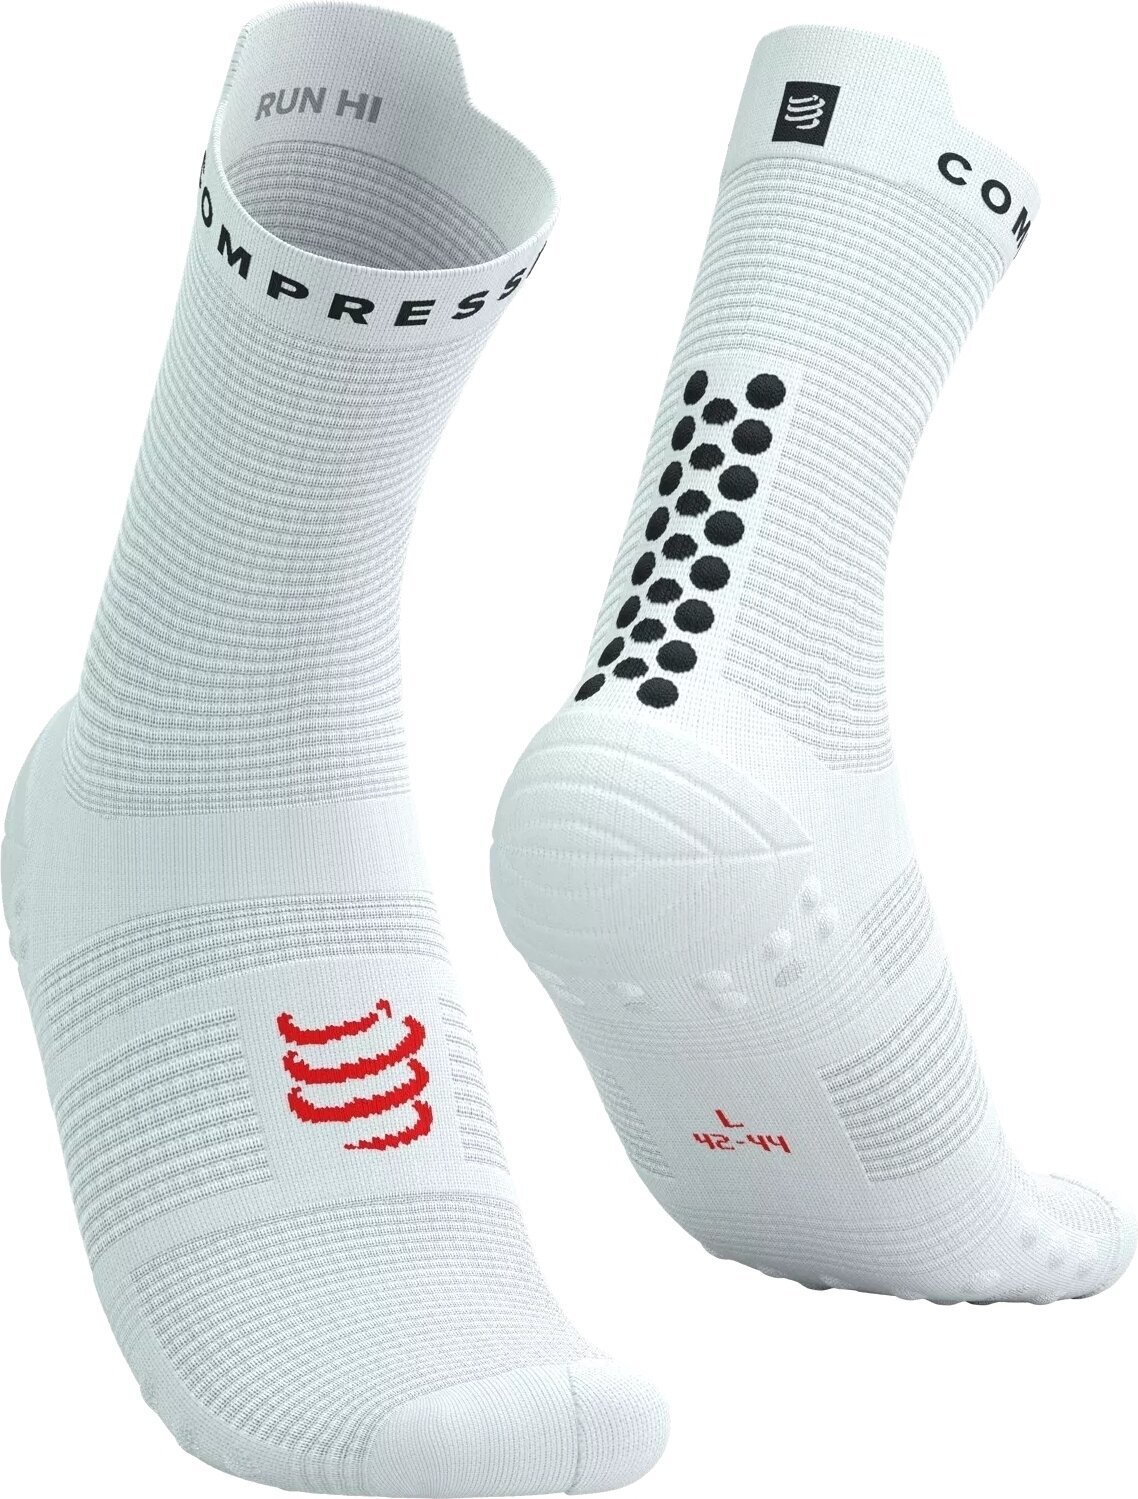 Calcetines para correr Compressport Pro Racing Socks V4.0 Run High White/Black/Core Red T3 Calcetines para correr